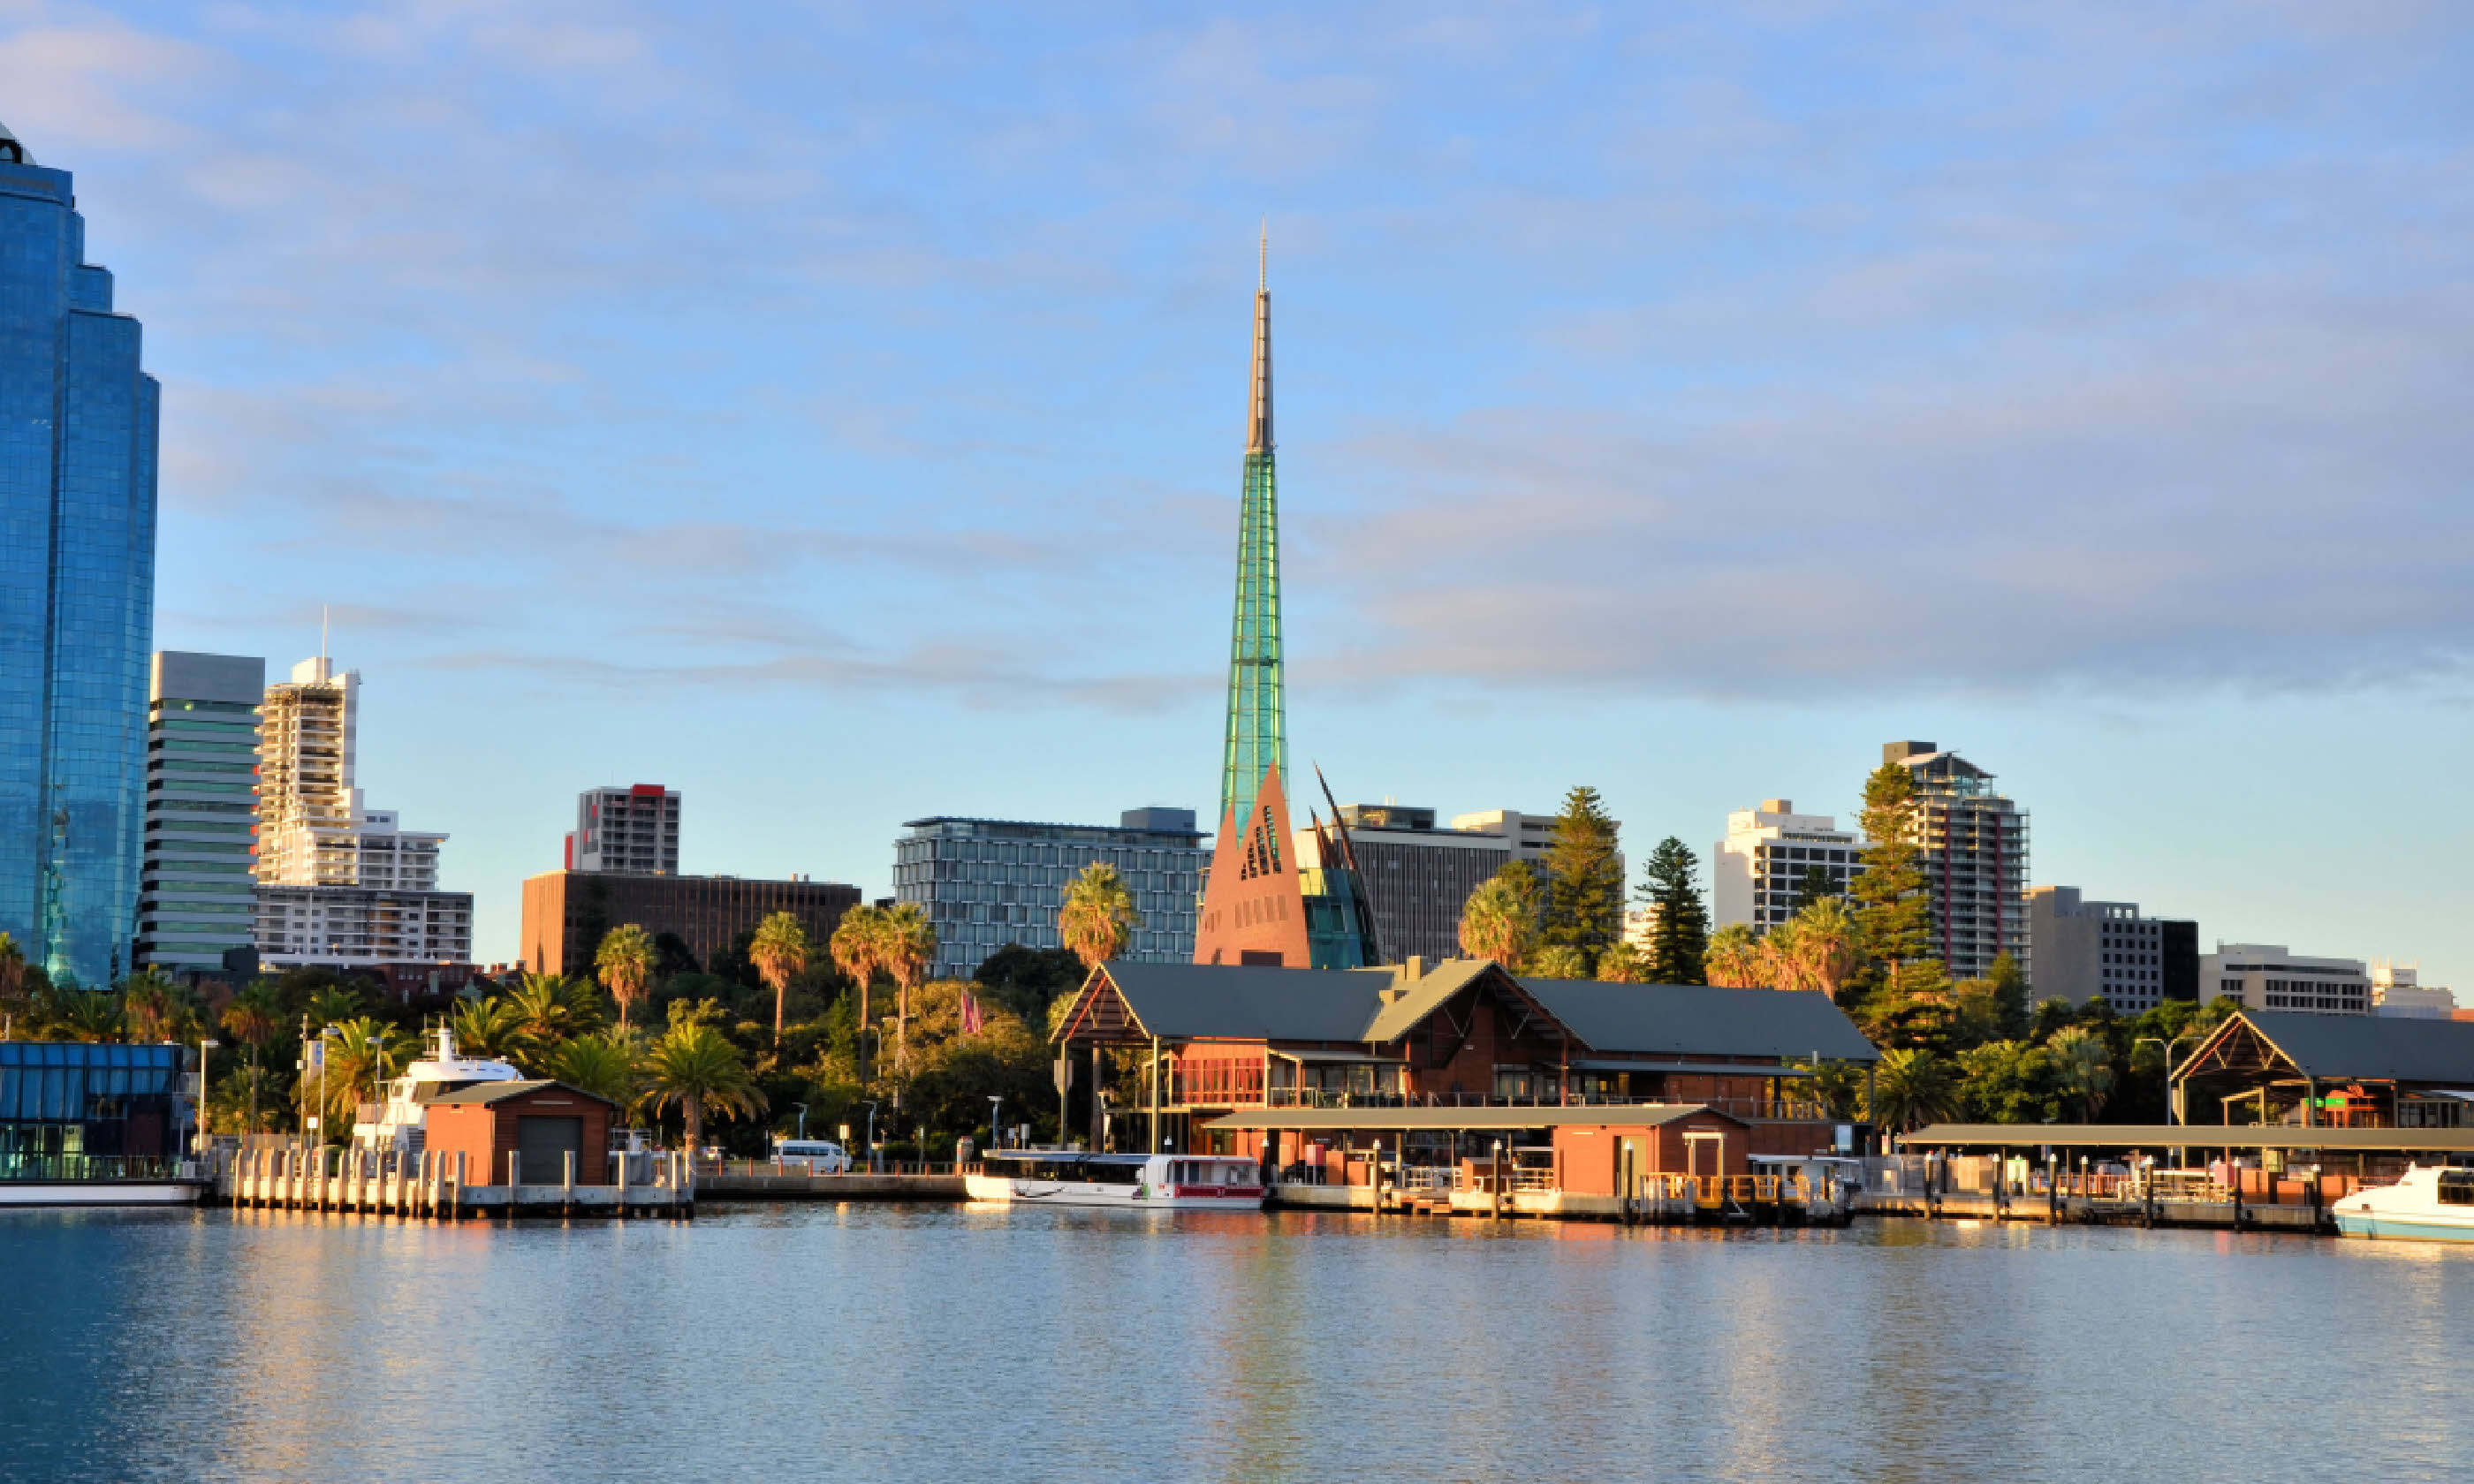 View of Perth City Centre from Swan River (Shutterstock)